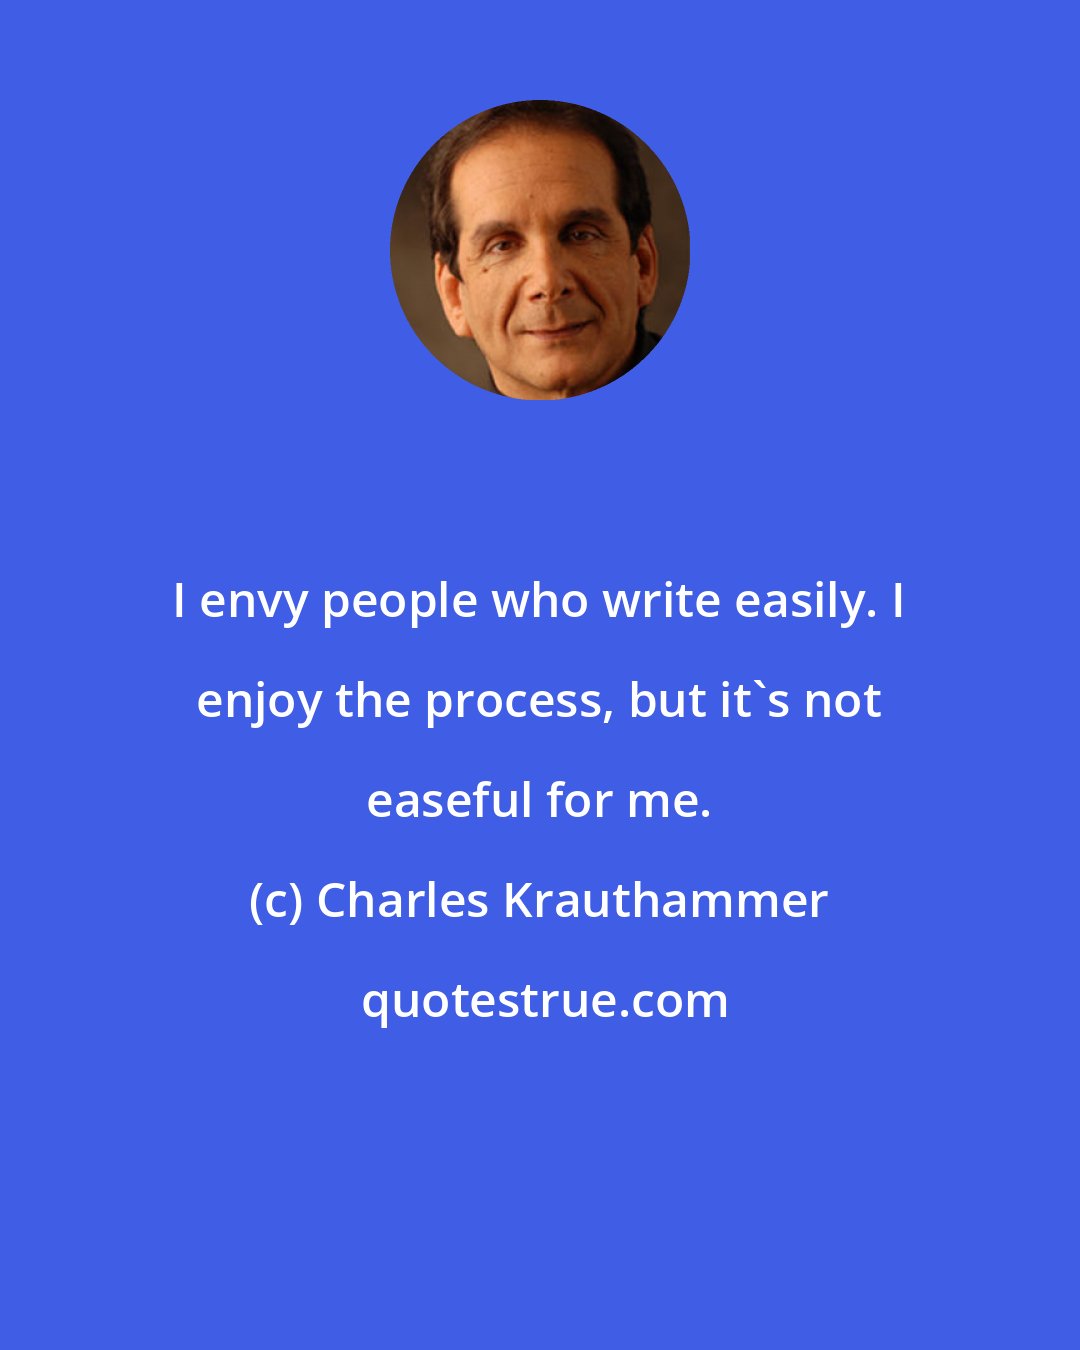 Charles Krauthammer: I envy people who write easily. I enjoy the process, but it's not easeful for me.